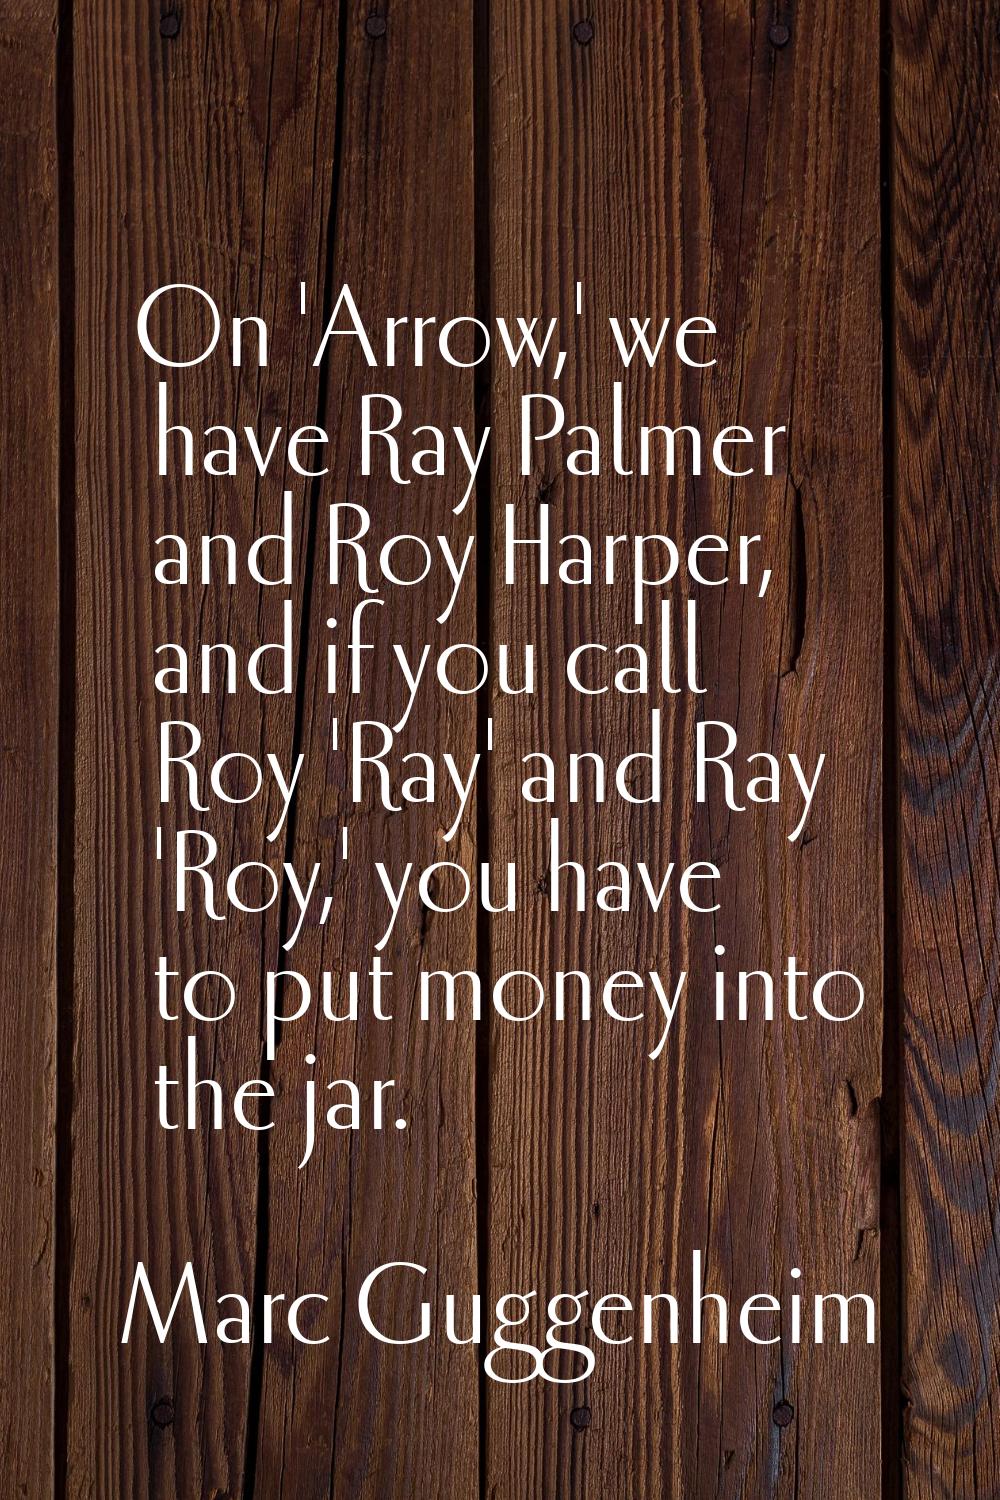 On 'Arrow,' we have Ray Palmer and Roy Harper, and if you call Roy 'Ray' and Ray 'Roy,' you have to